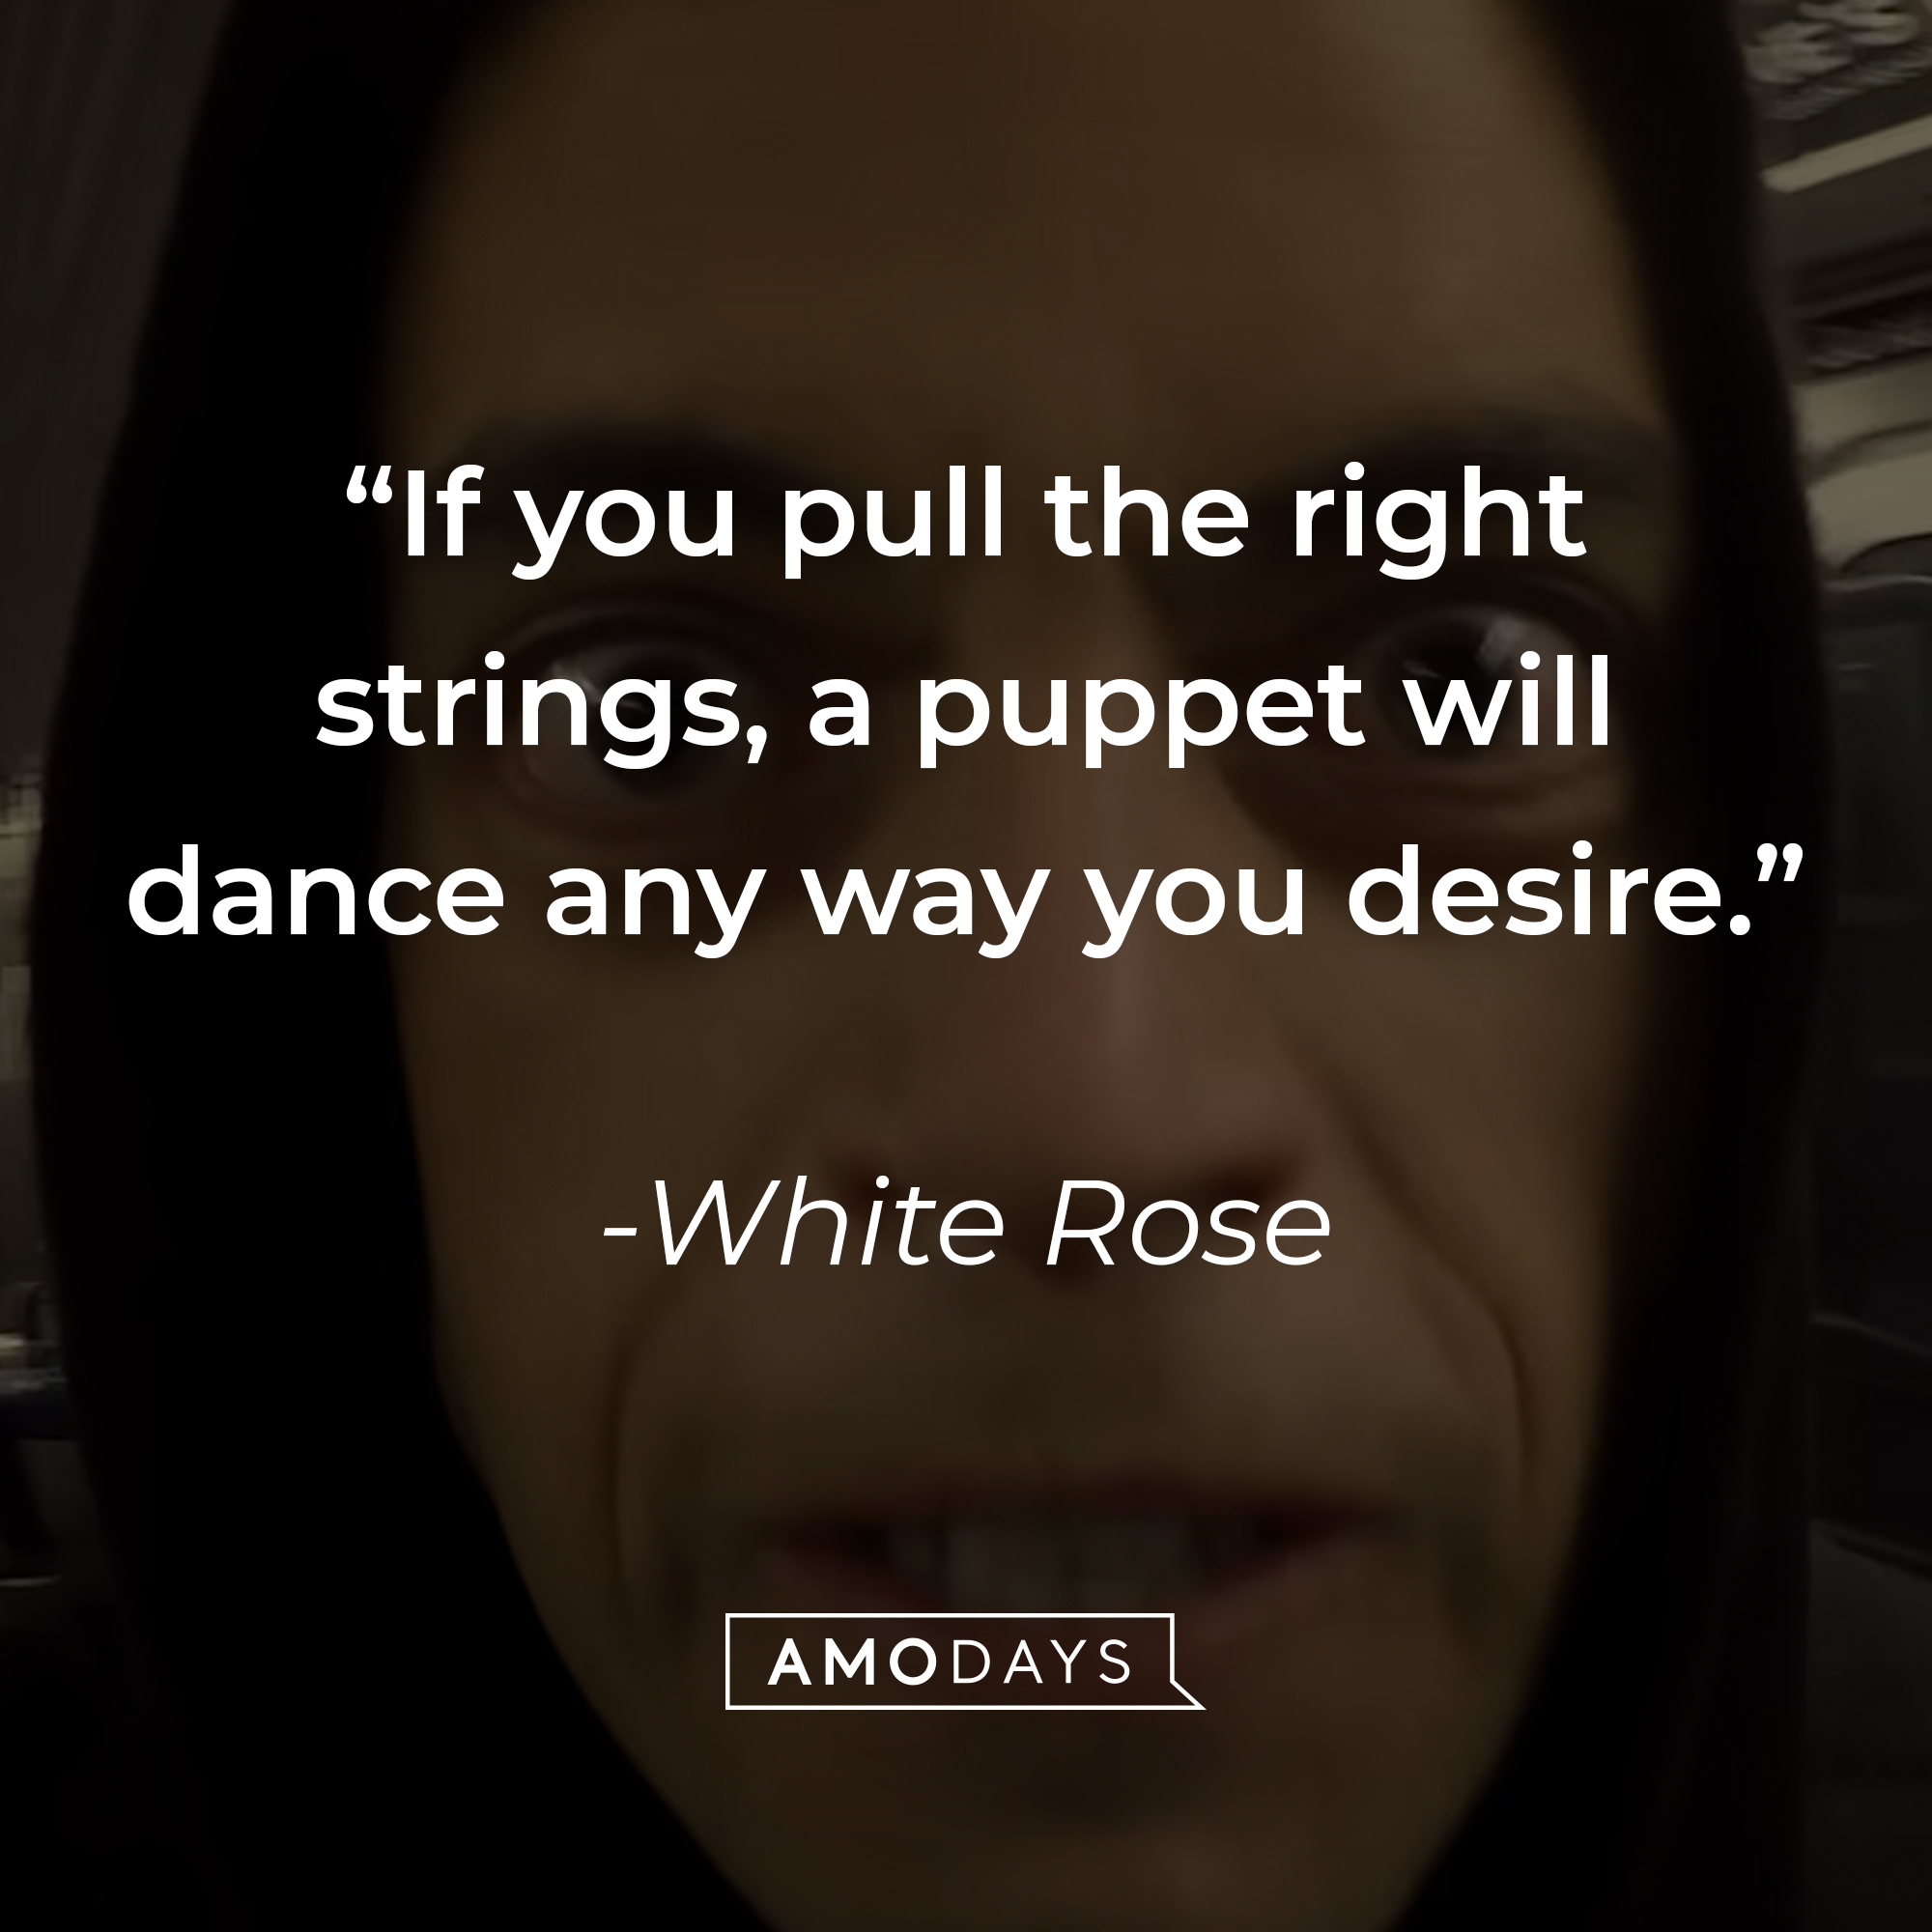 White Rose's quote: "If you pull the right strings, a puppet will dance any way you desire." | Source: youtube.com/MrRobot